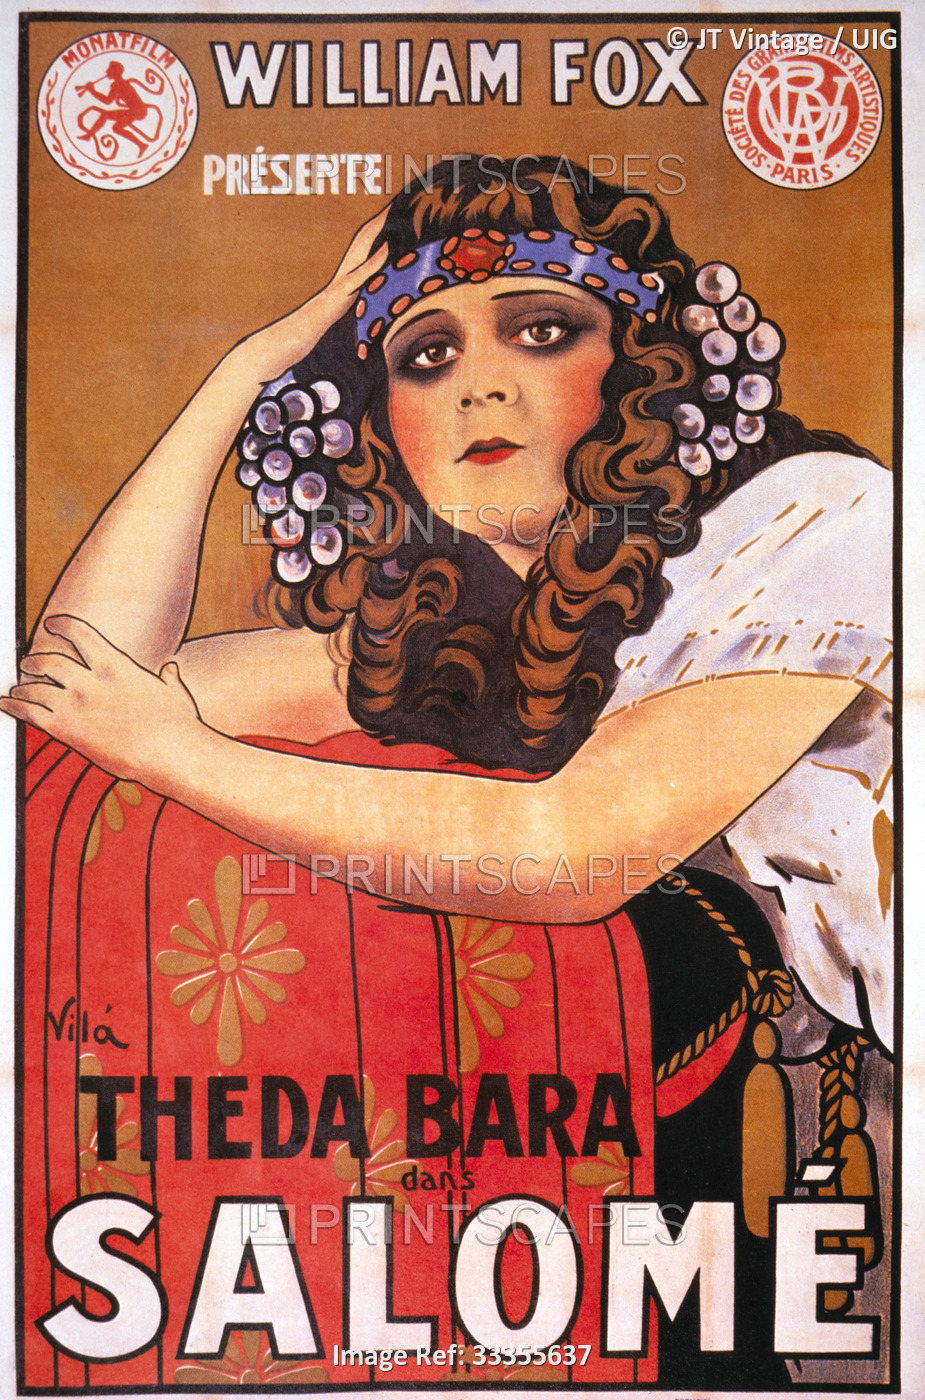 Theda Bara on Movie Poster for the Silent Movie "Salome", 1918.